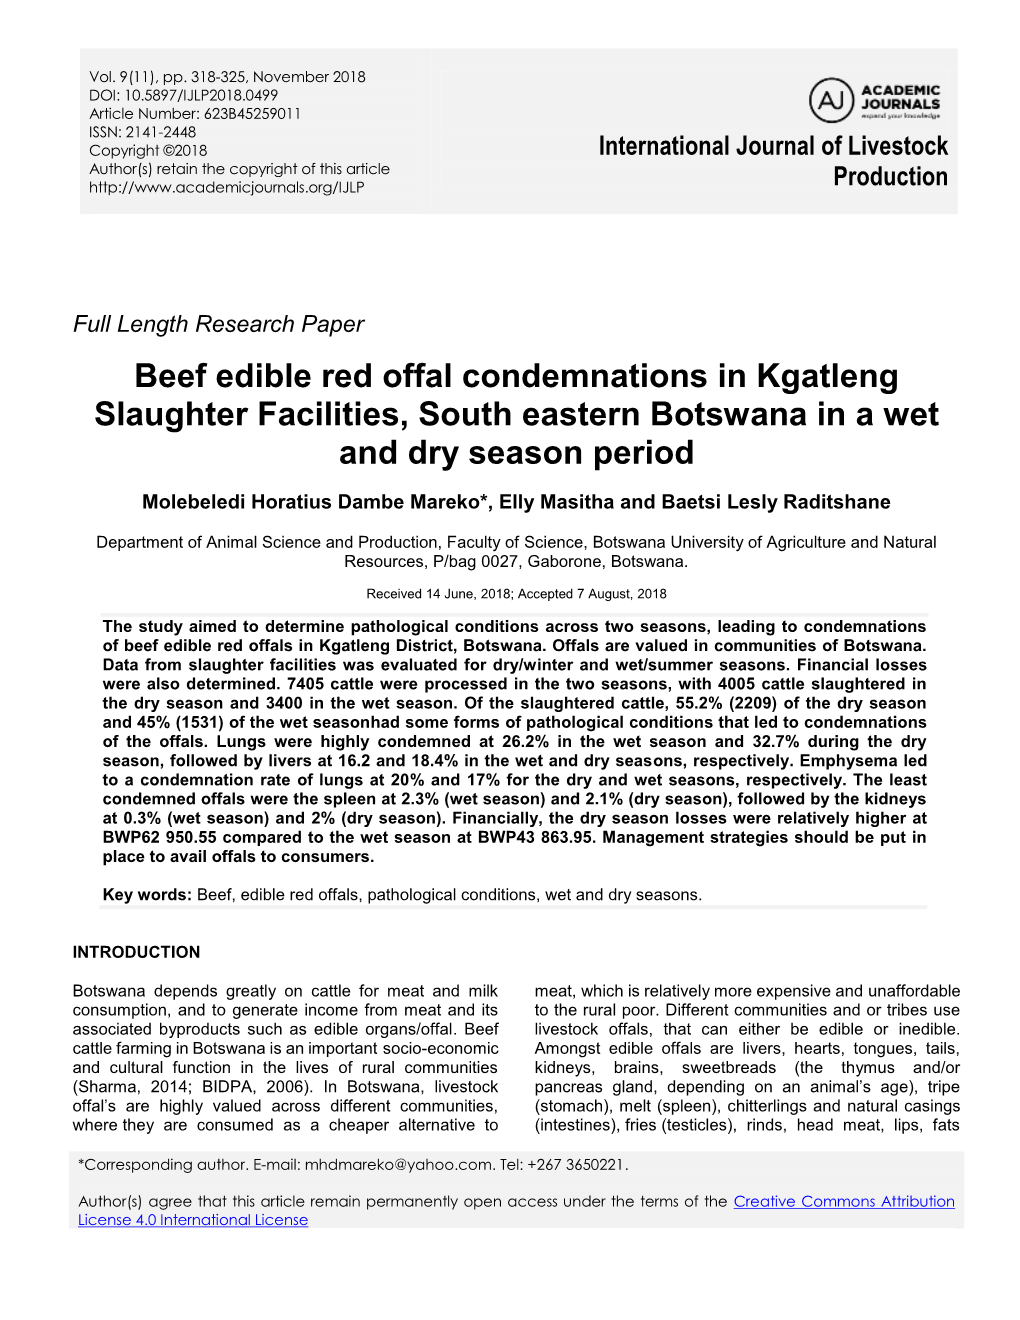 Beef Edible Red Offal Condemnations in Kgatleng Slaughter Facilities, South Eastern Botswana in a Wet and Dry Season Period